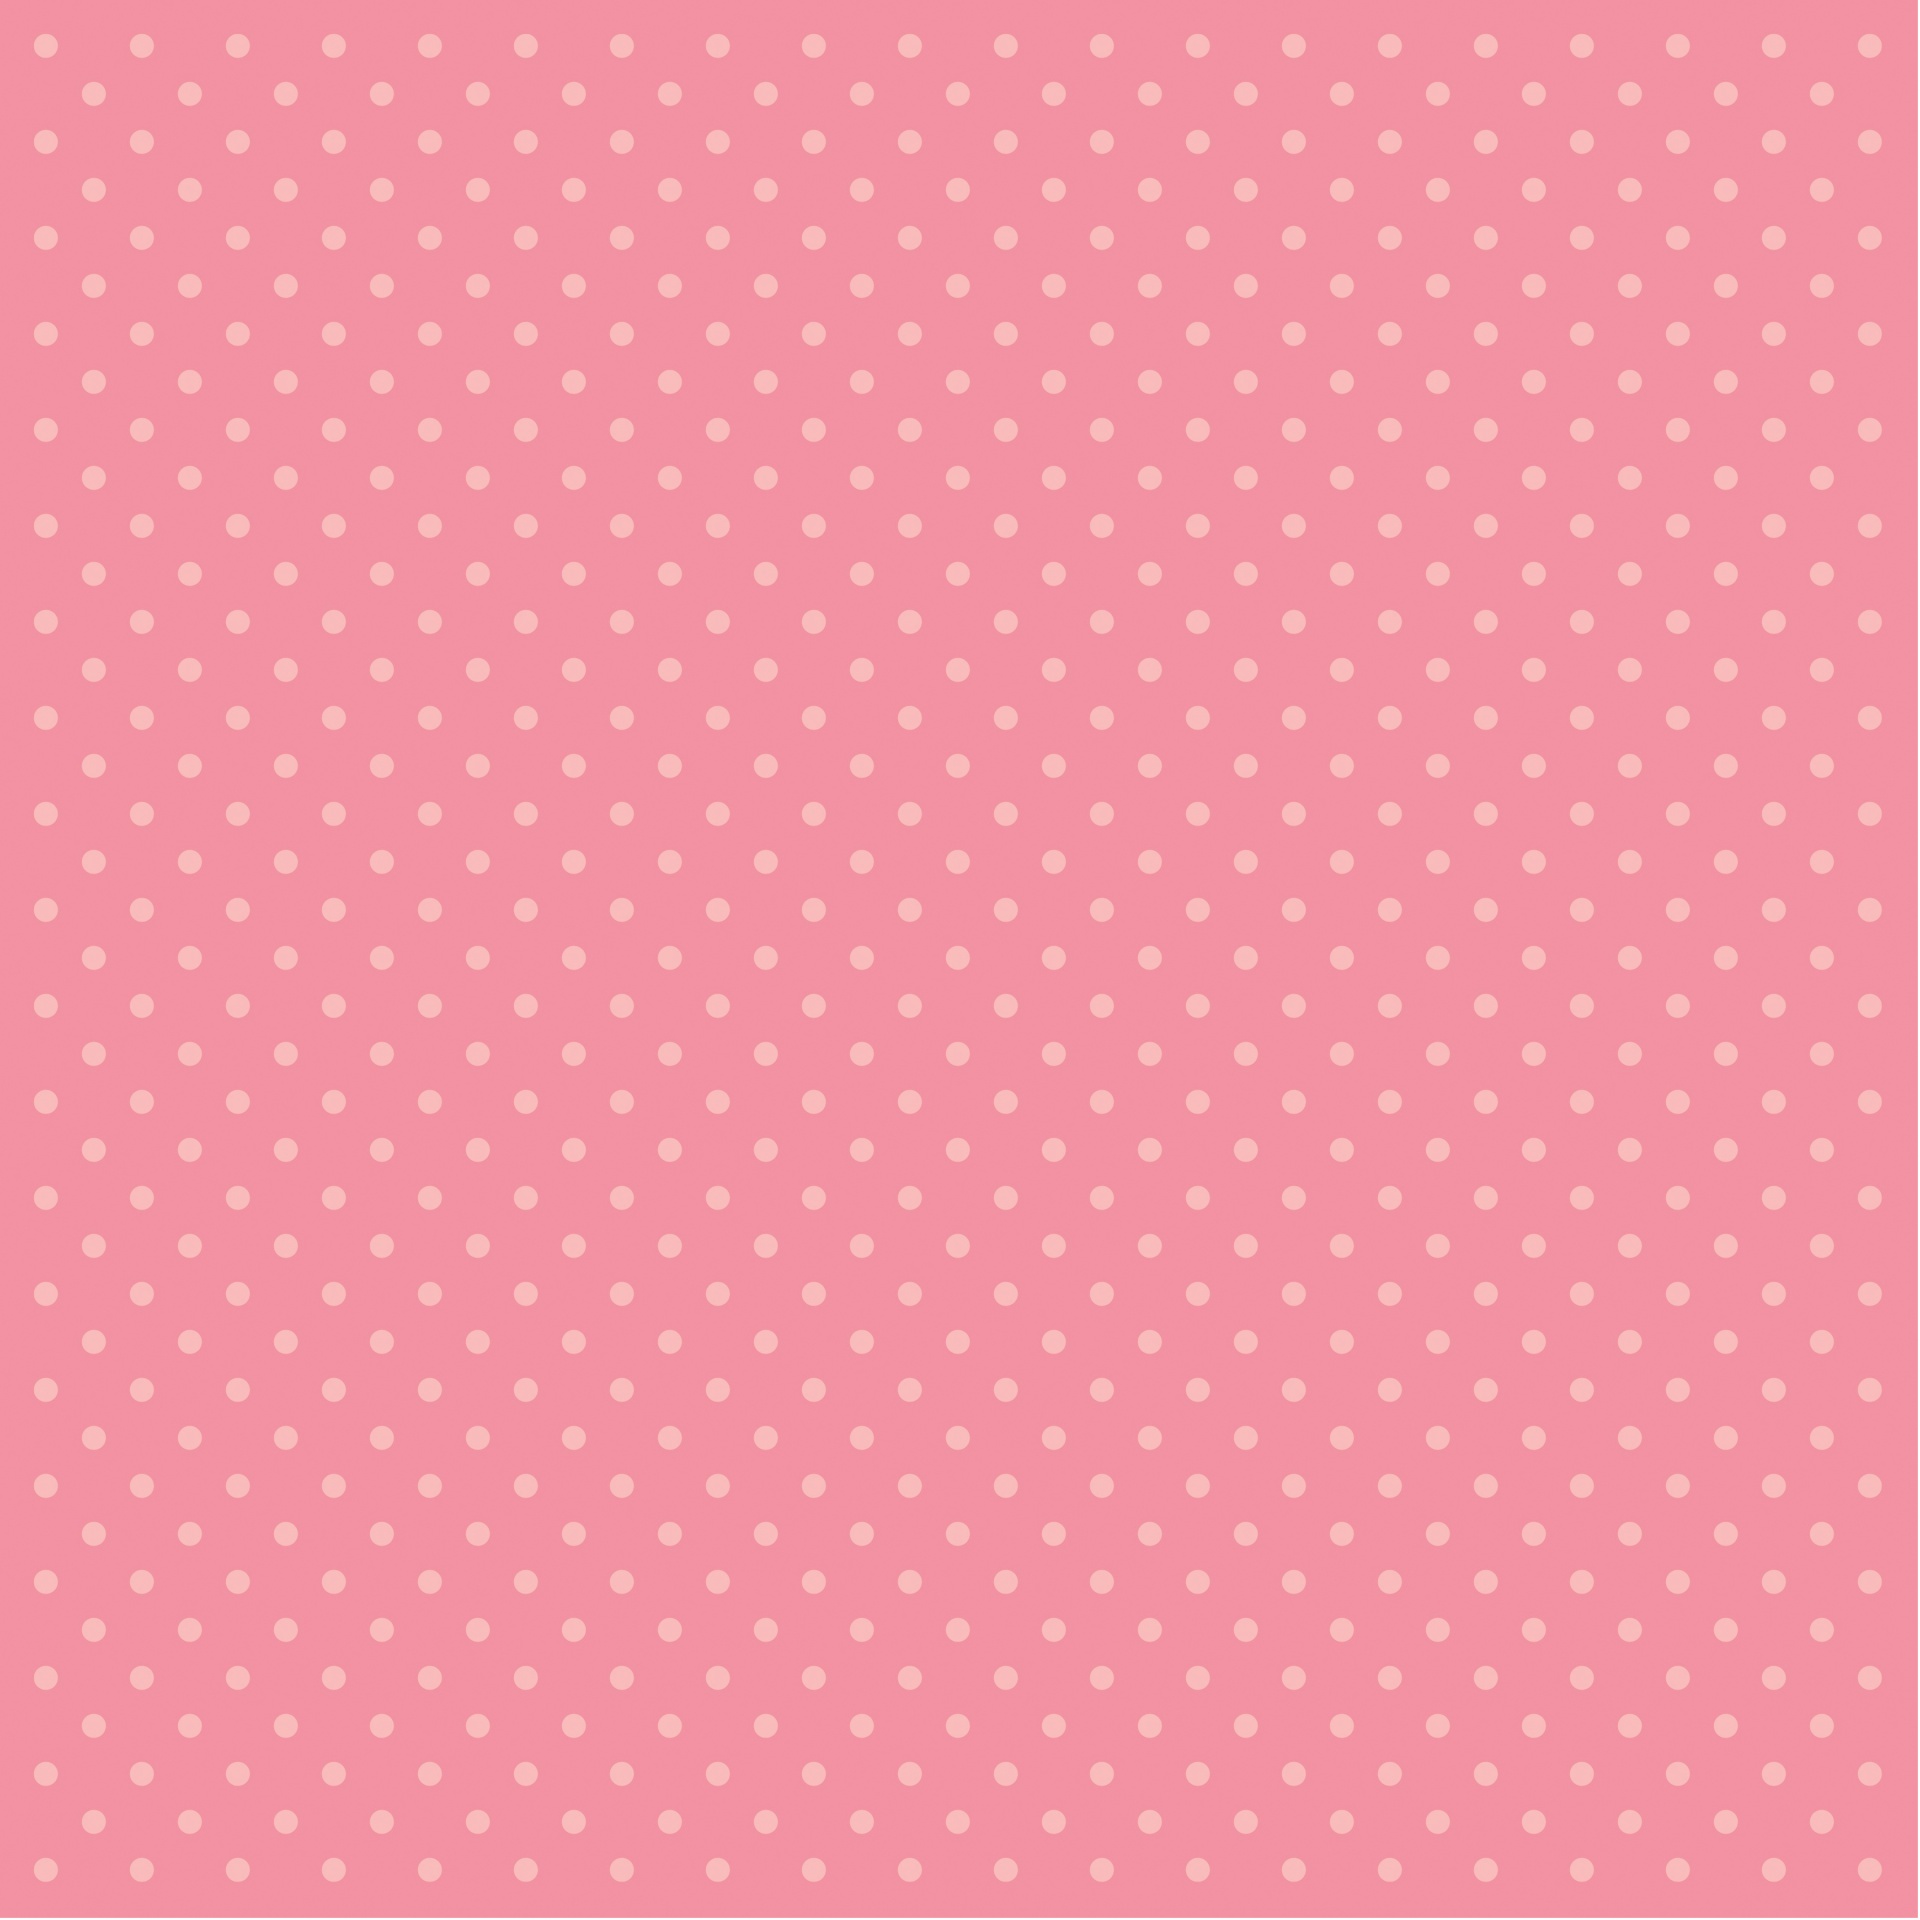 Vintage style polka dots background in pink